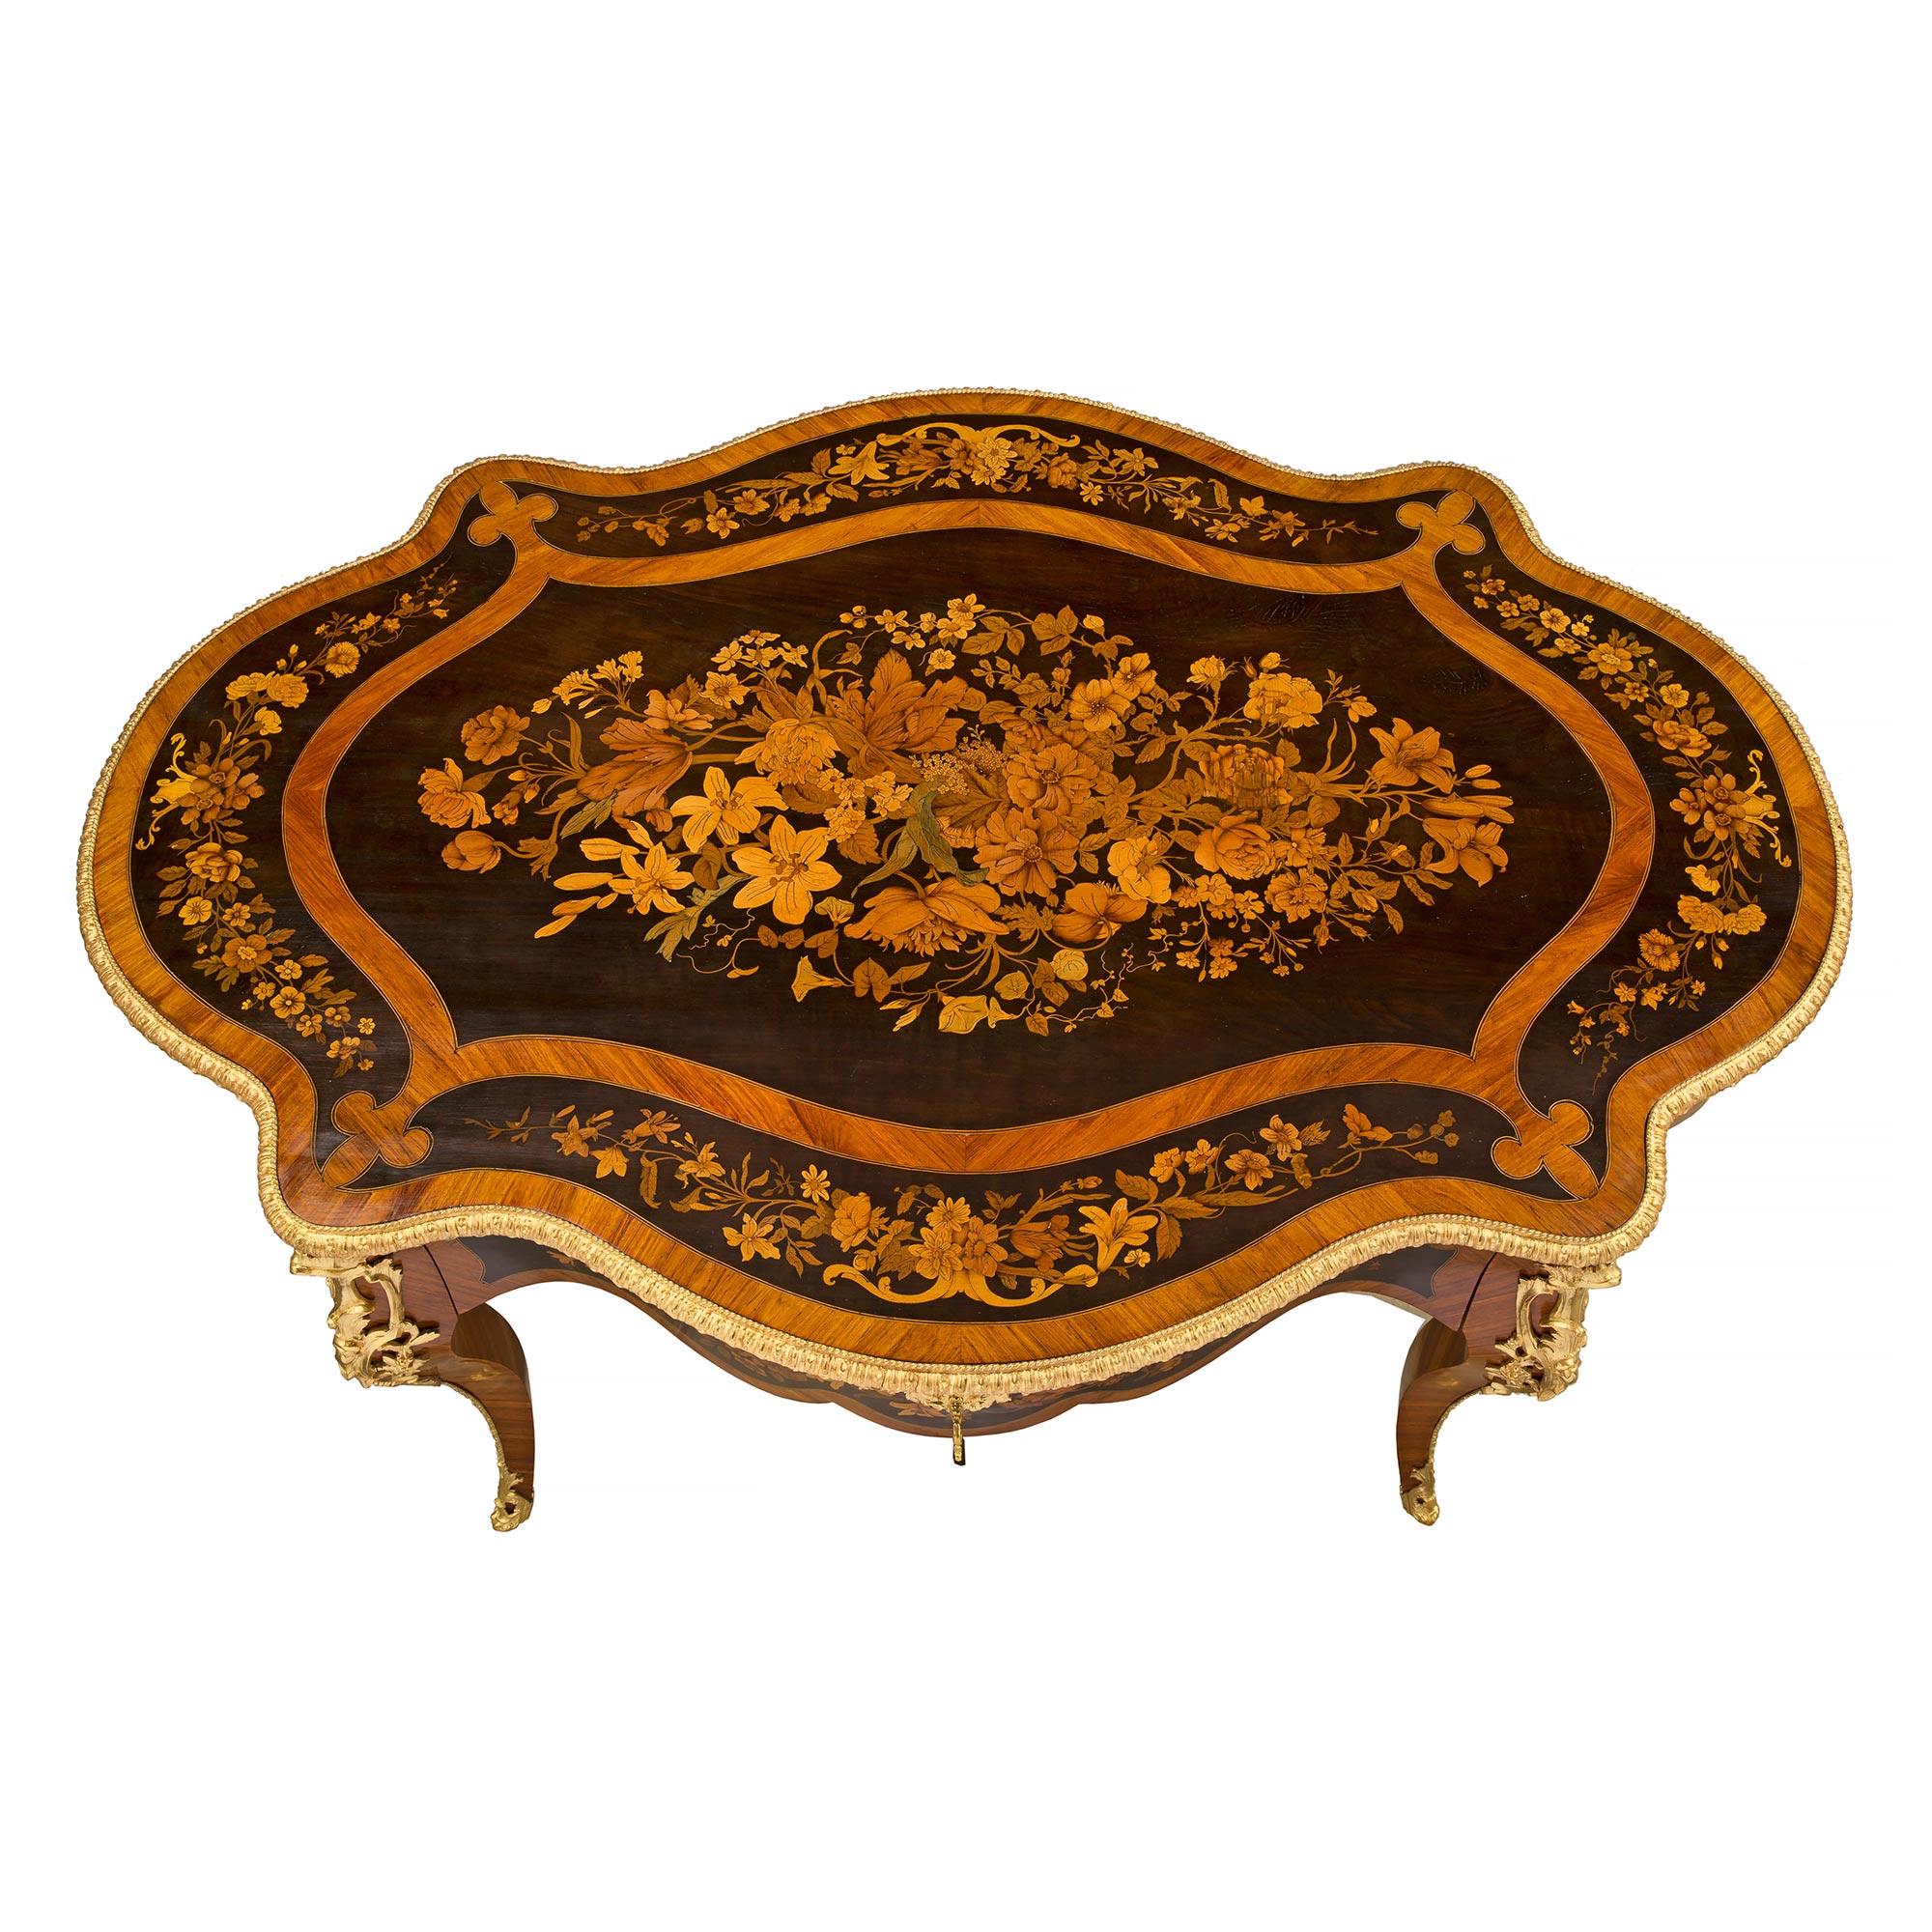 A striking French 19th century Louis XV st. Napoleon III period exotic wood marquetry and ormolu center table. The table is raised by elegant cabriole legs with beautiful pierced wrap around foliate ormolu sabots and a fine fillet which extends up